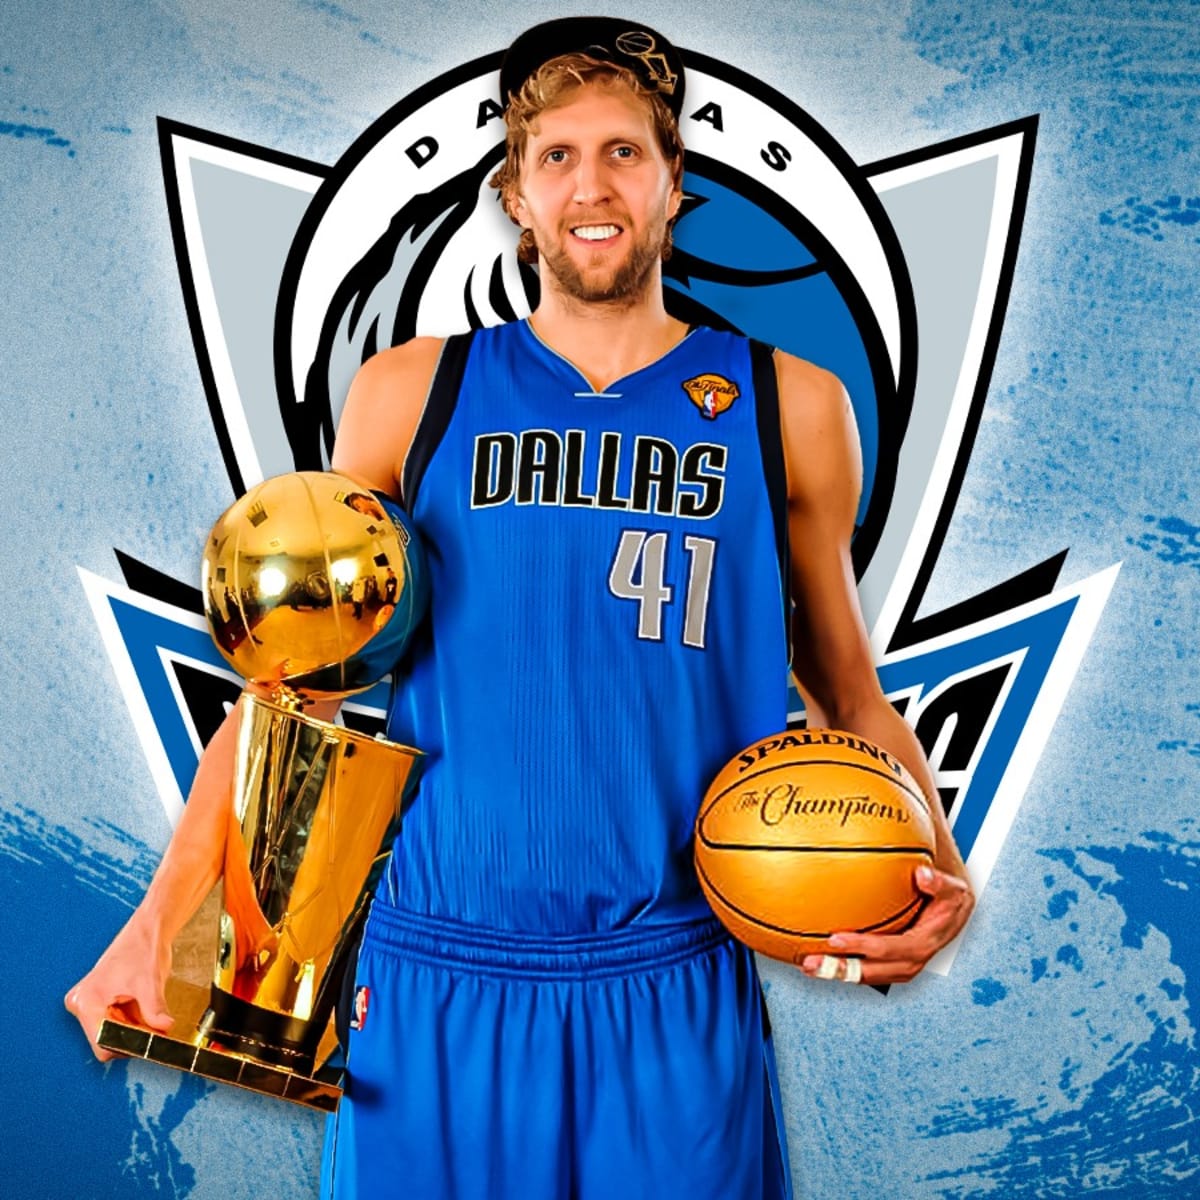 NBA UK - The votes are in, and you decided that Dirk Nowitzki's 2011 NBA  Finals performance was the Greatest All-Time NBA European Moment! 🏆  #NBA75EuroVote